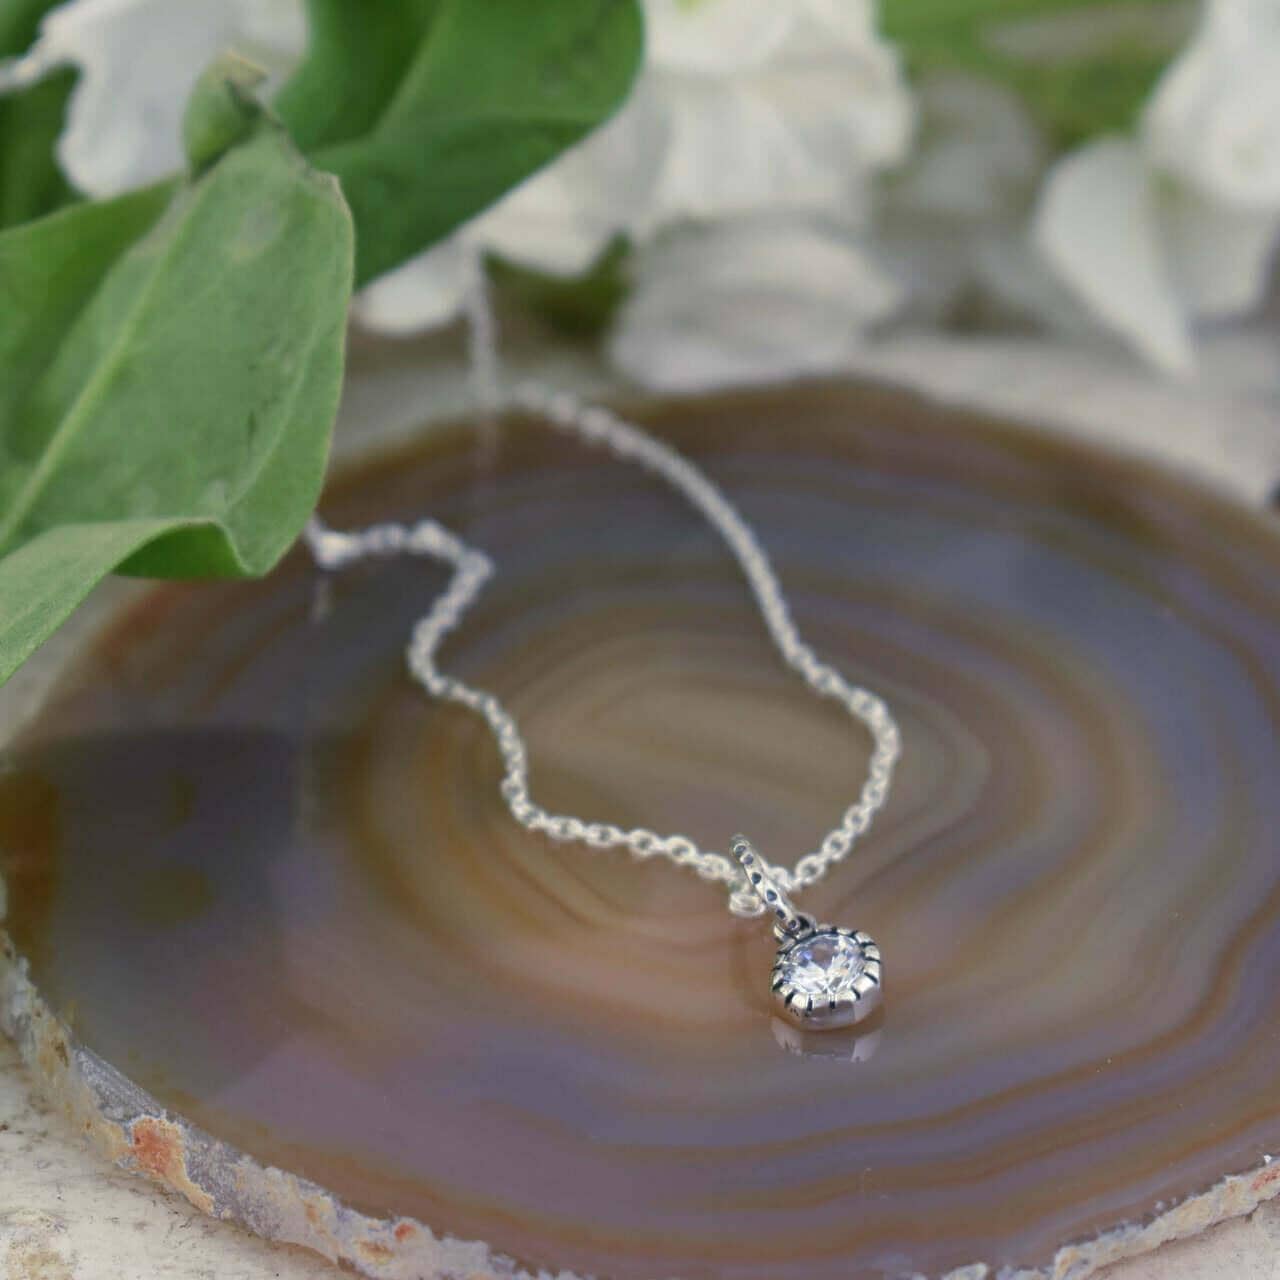 Sterling silver necklace with cubic zirconia bling